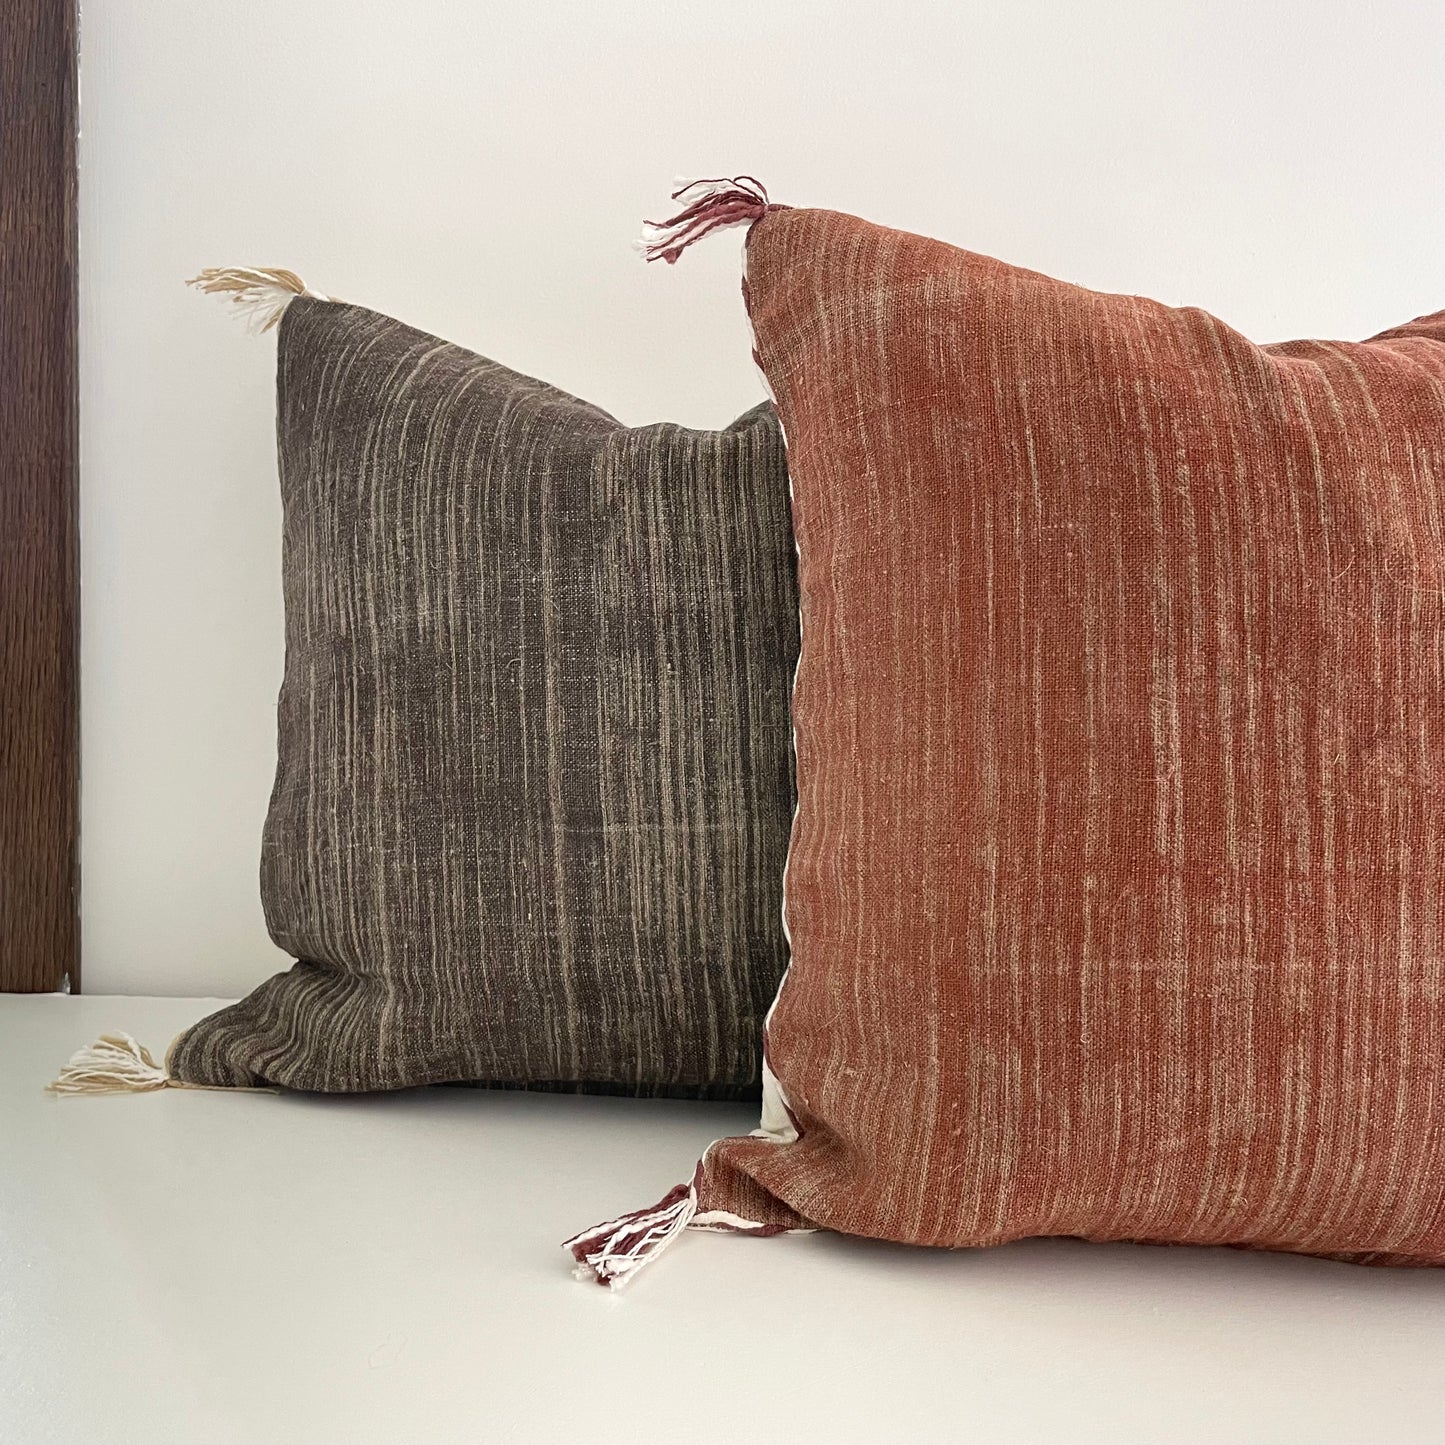 18x18 hand woven linen pillow cover with contrast edge - brown